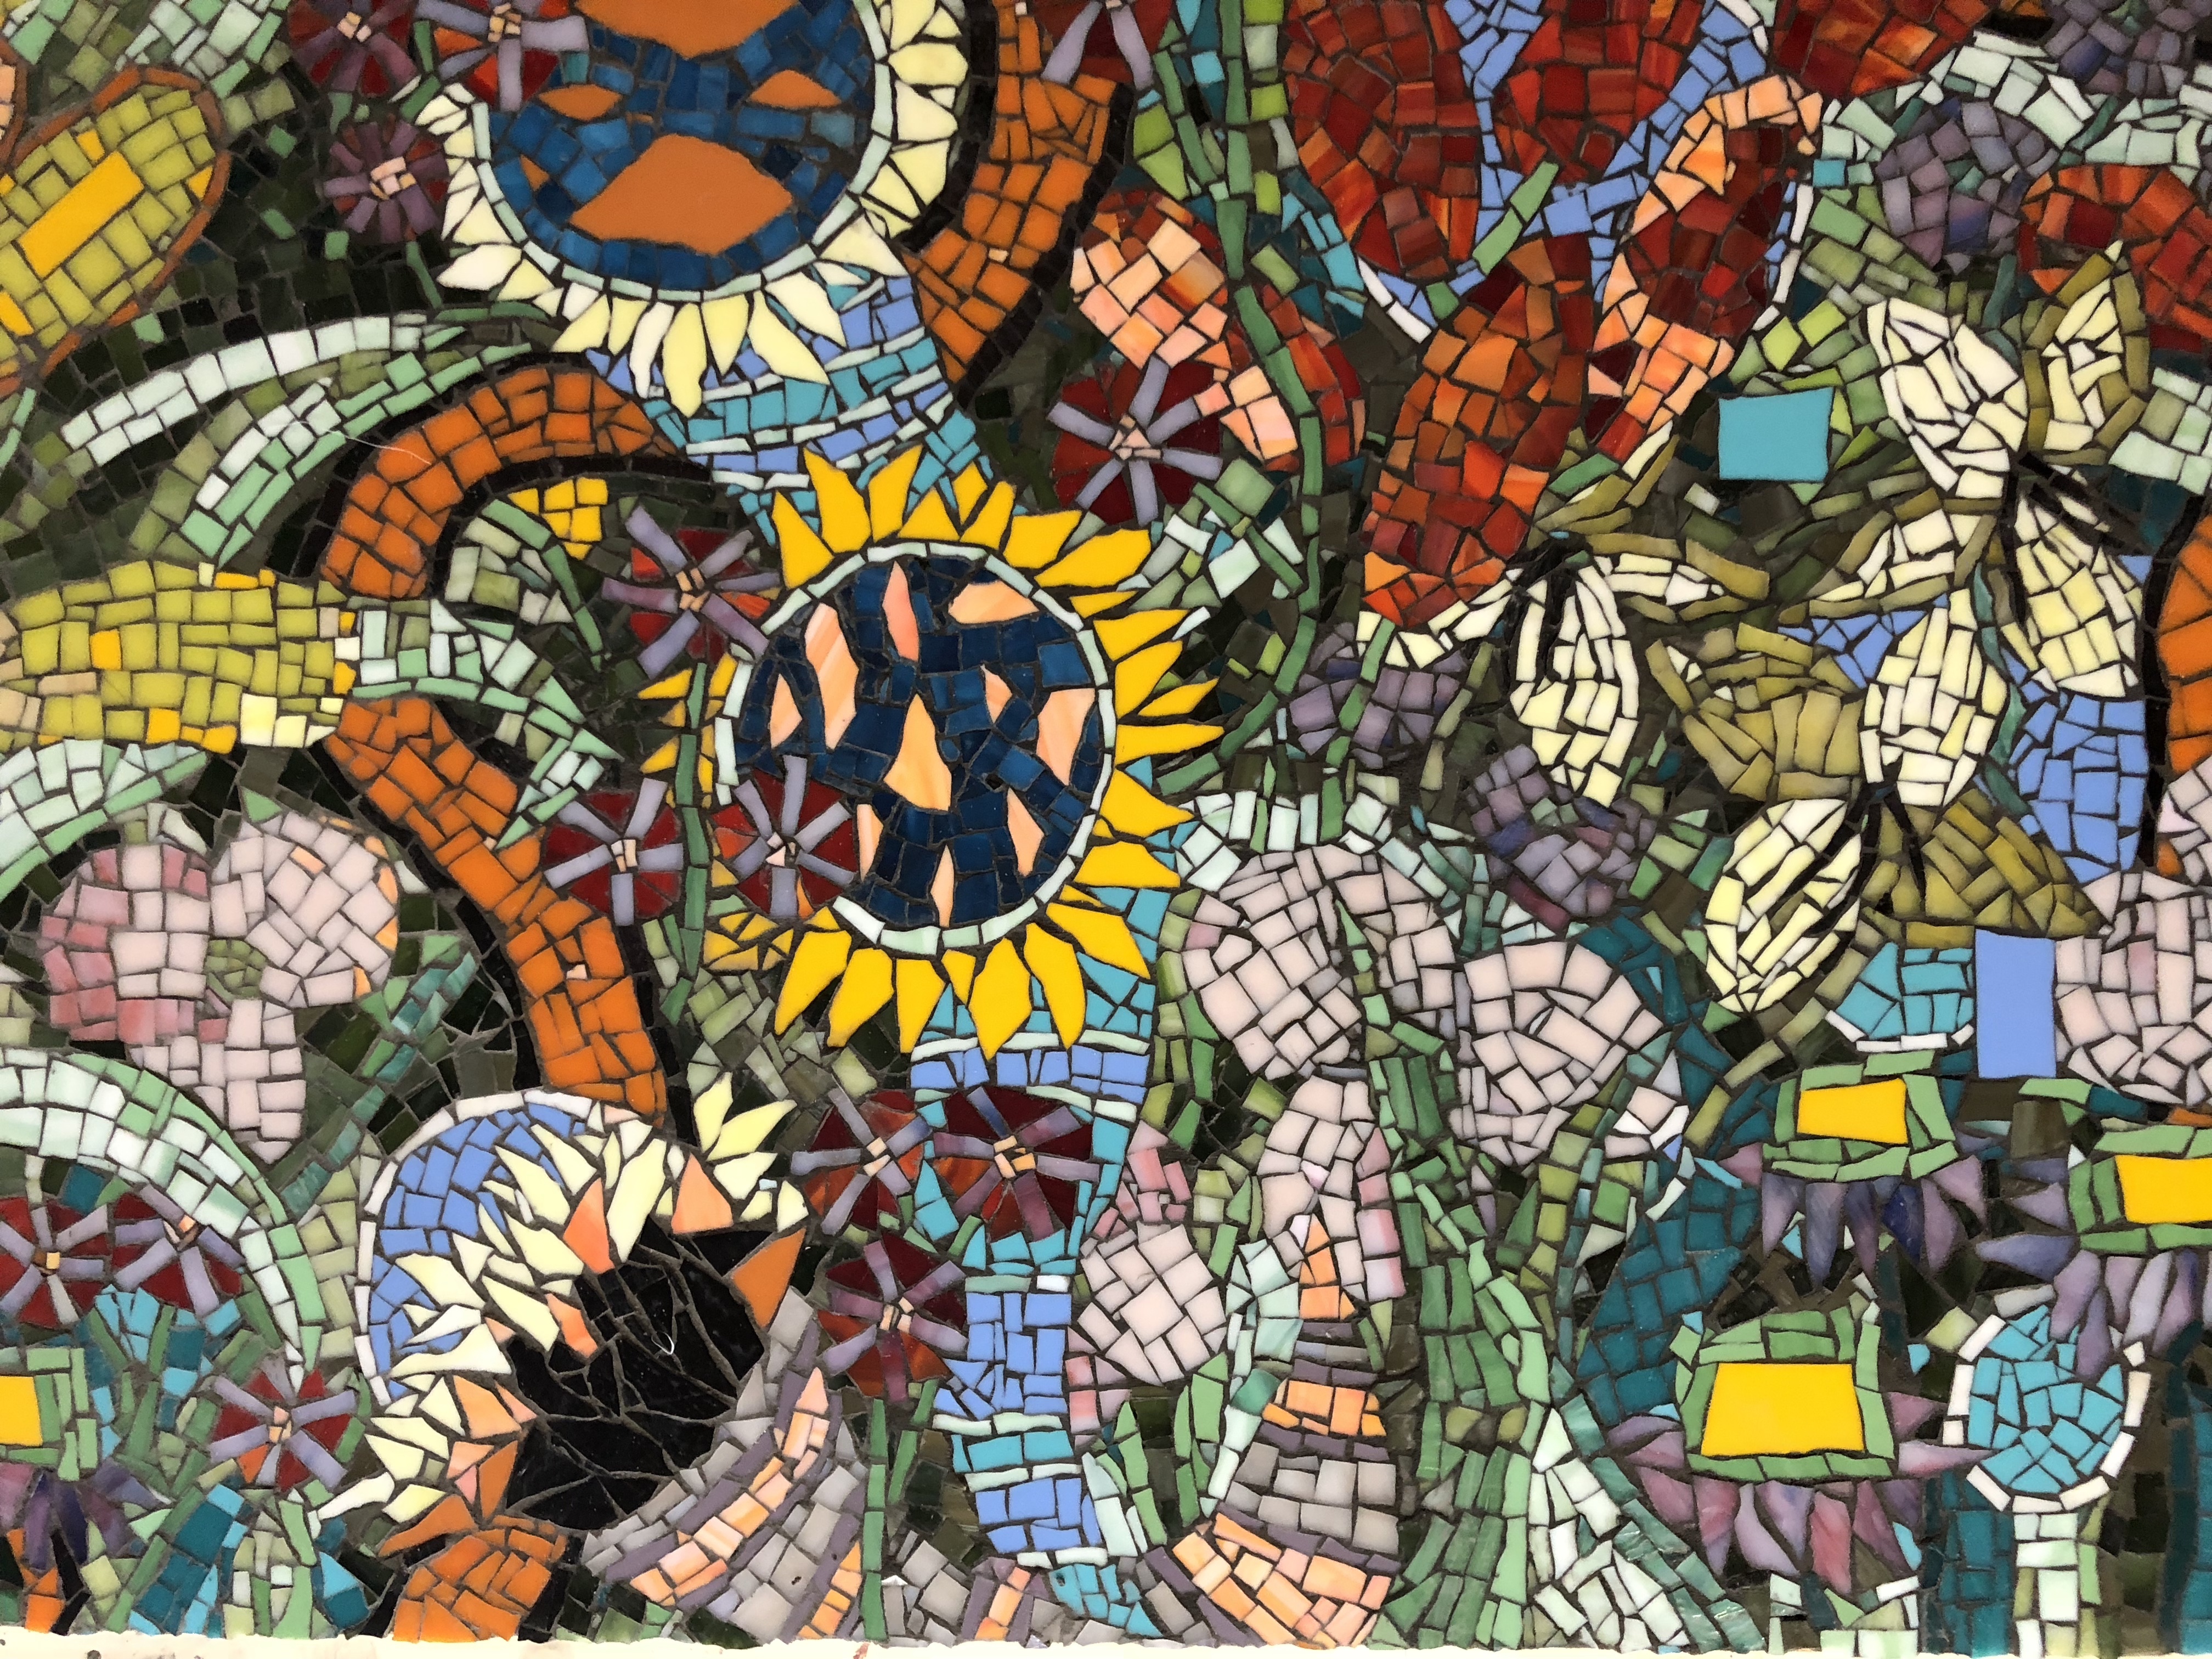 Professional Member Gallery Society Of American Mosaic Artists